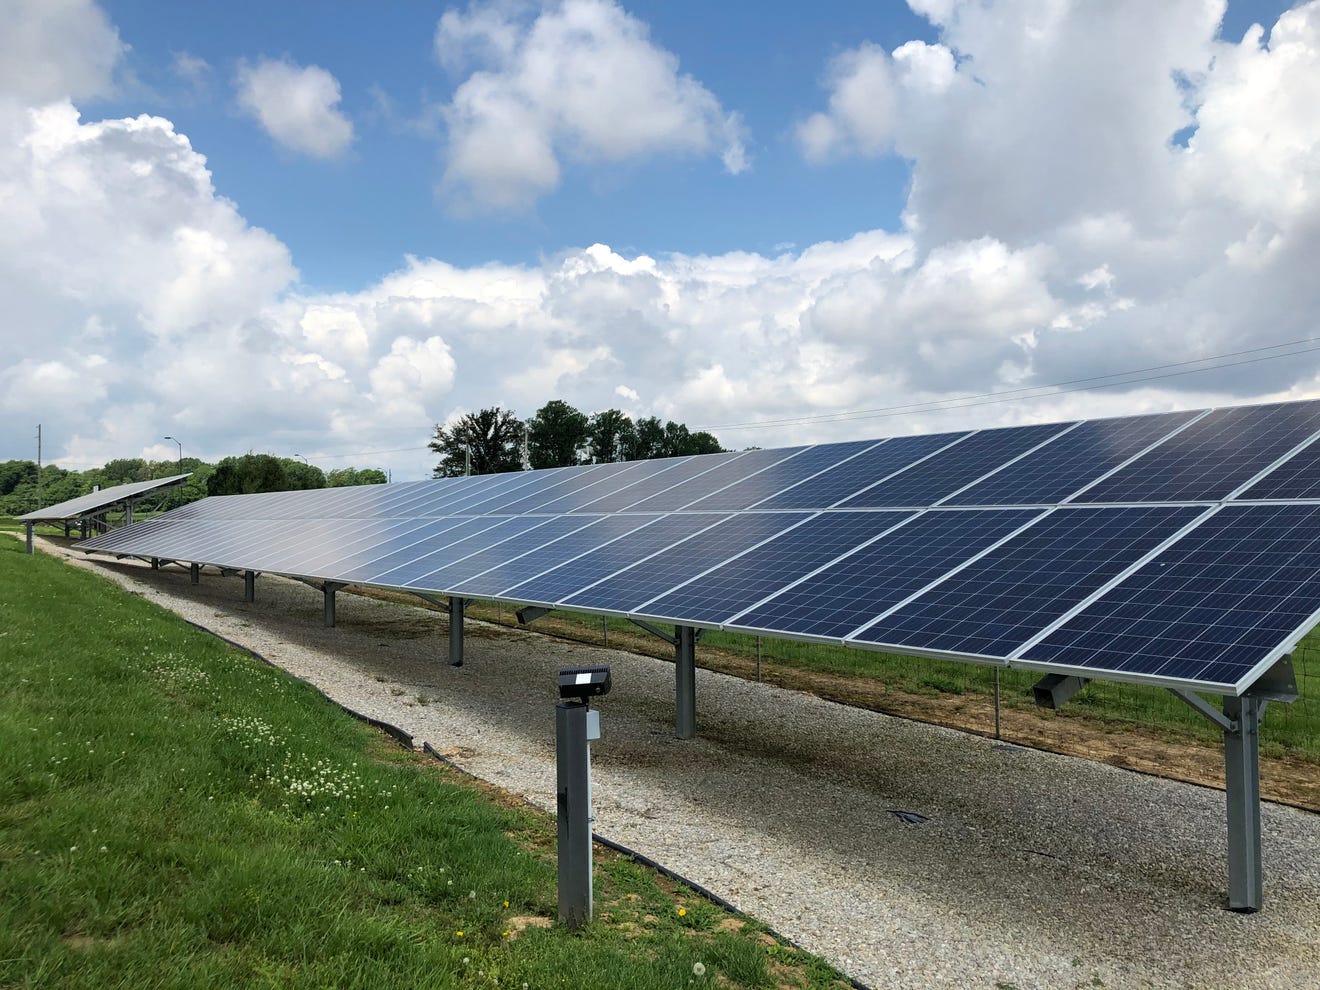 second-large-henderson-kentucky-solar-farm-gets-state-approval